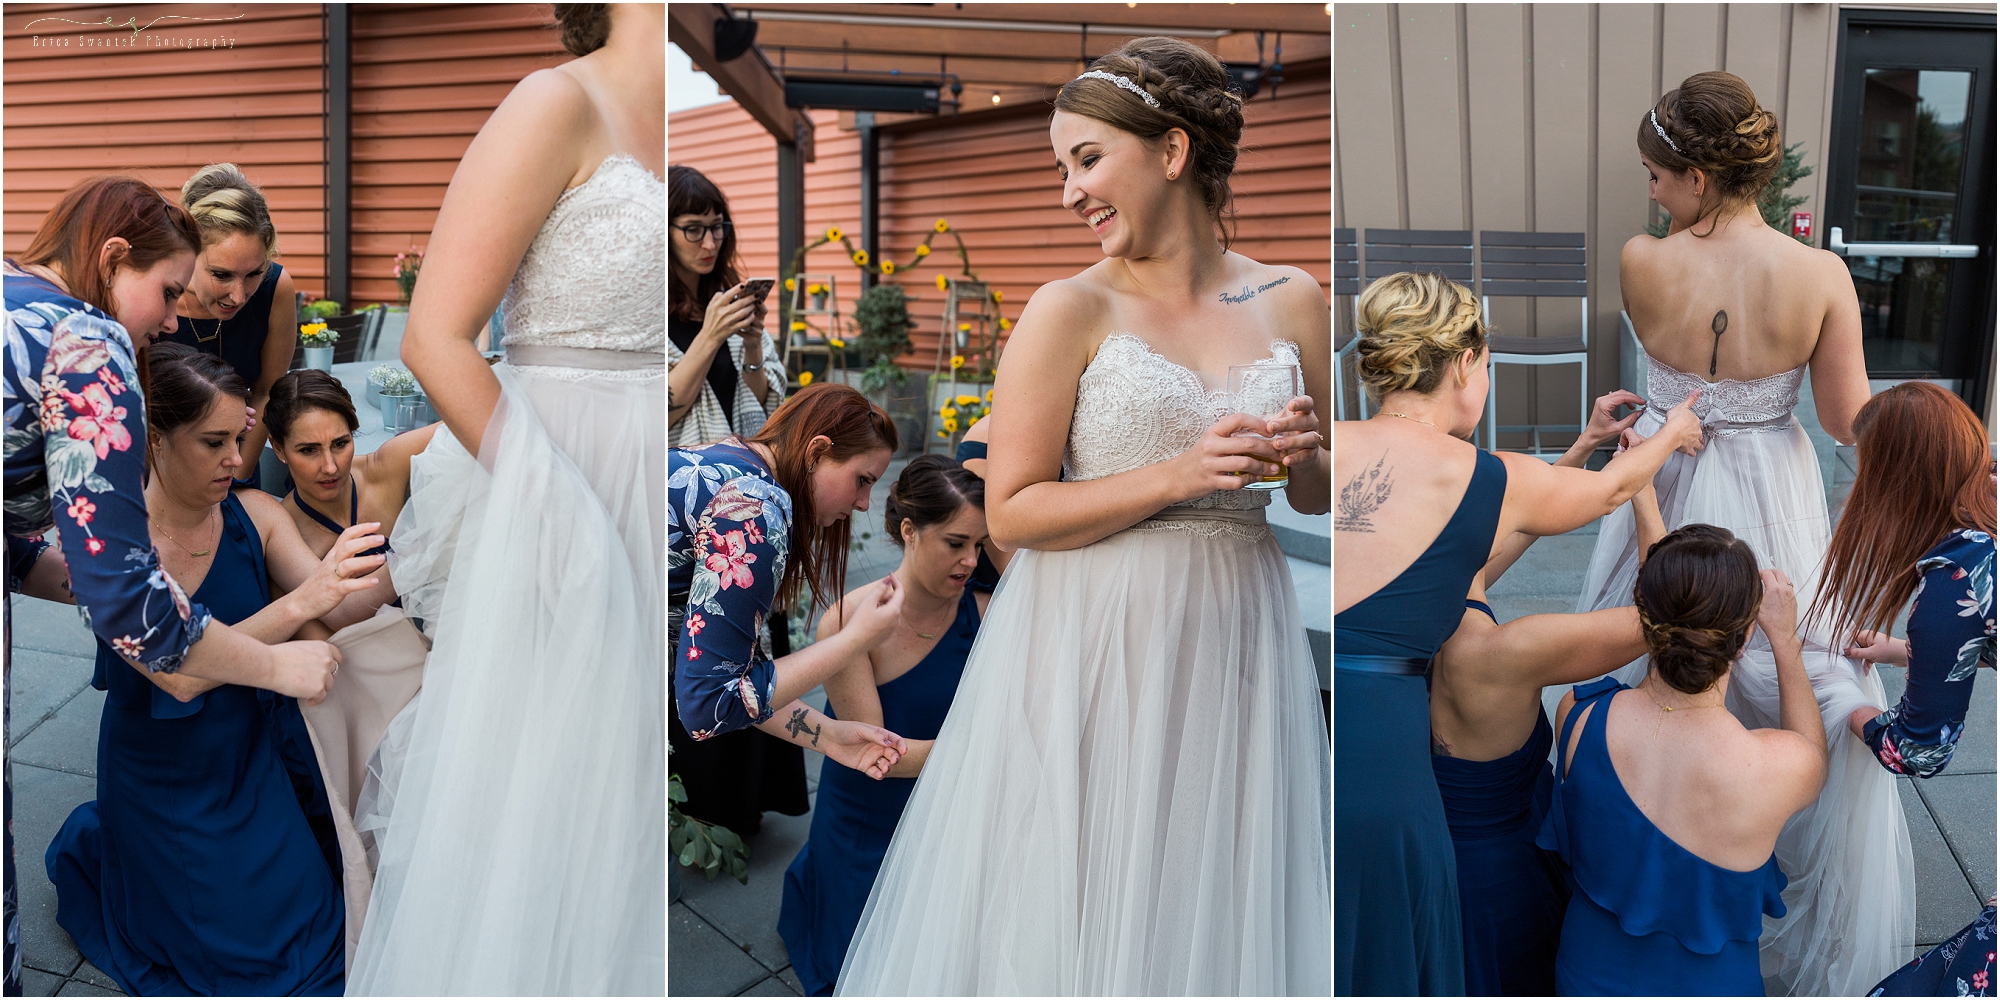 The bridemaids help the bride bustle her ivory gown by Wtoo before her reception at a Worthy Brewing Wedding in Bend, Oregon. | Erica Swantek Photography